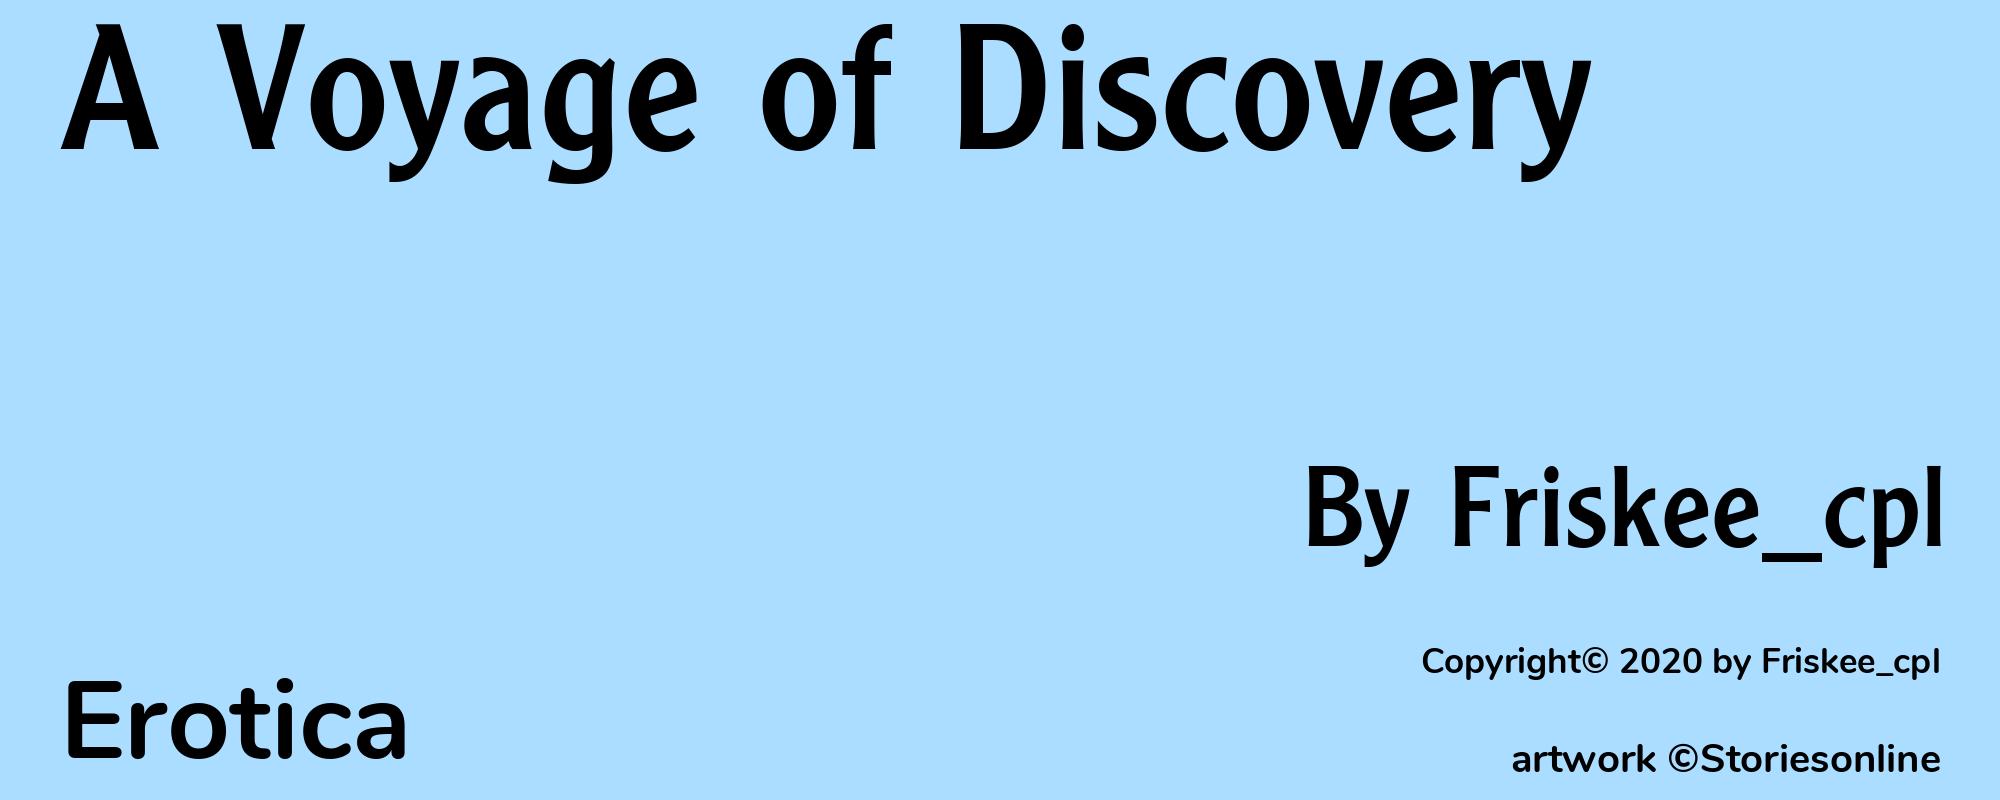 A Voyage of Discovery - Cover